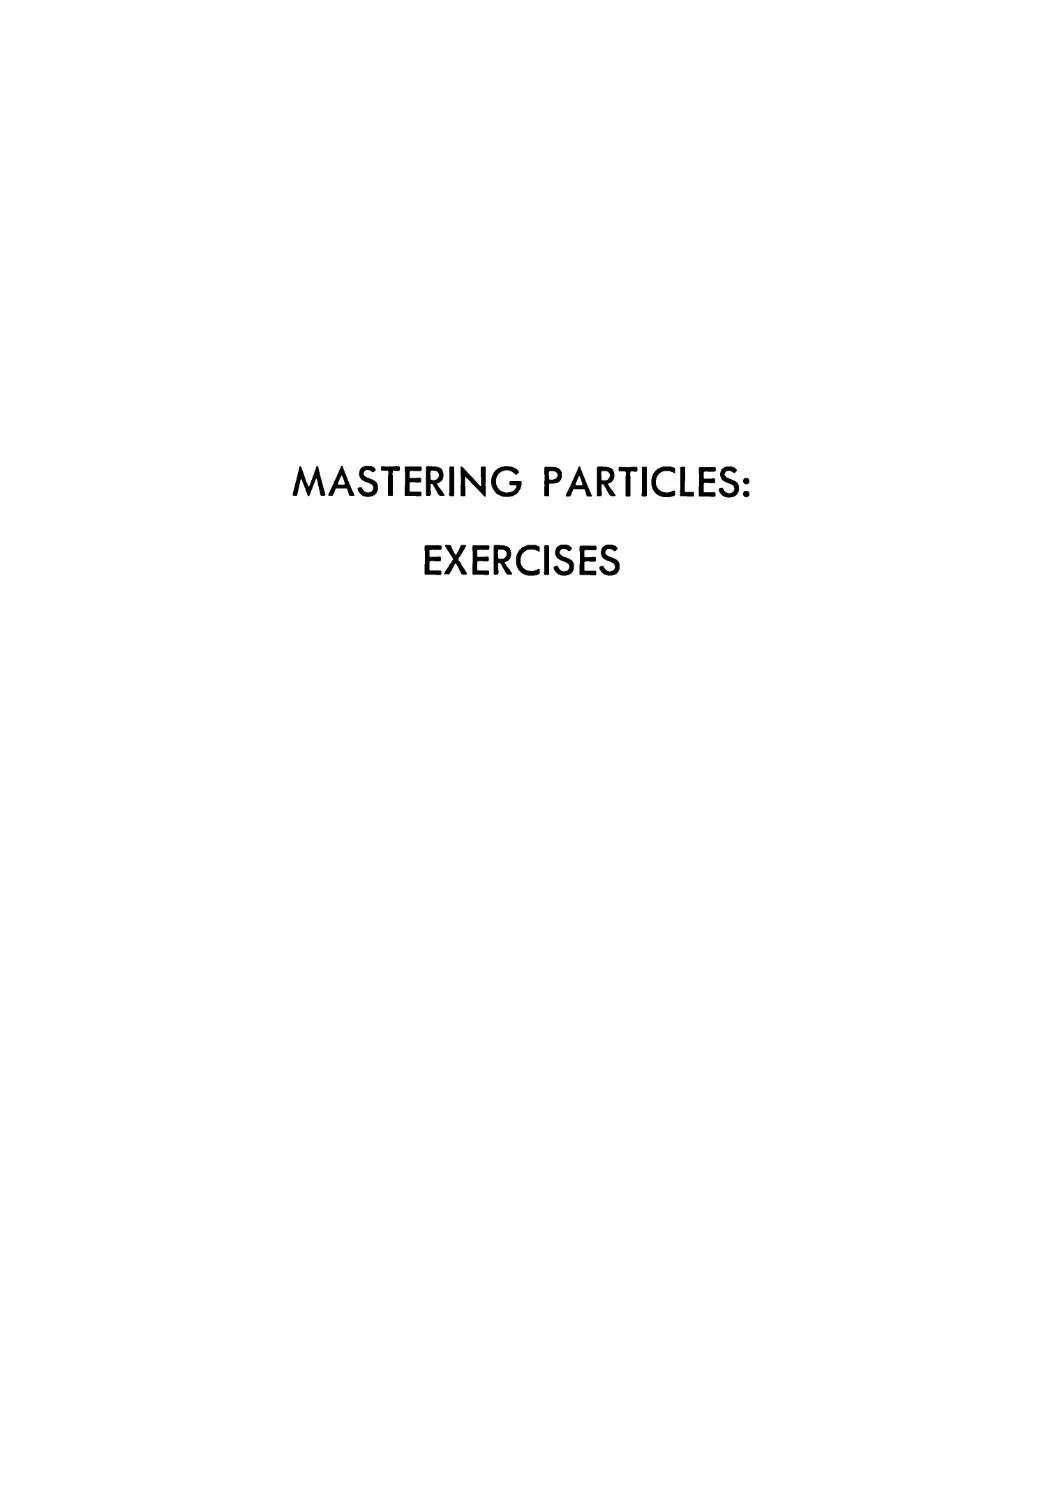 MASTERING PARTICLES: 
EXERCISES